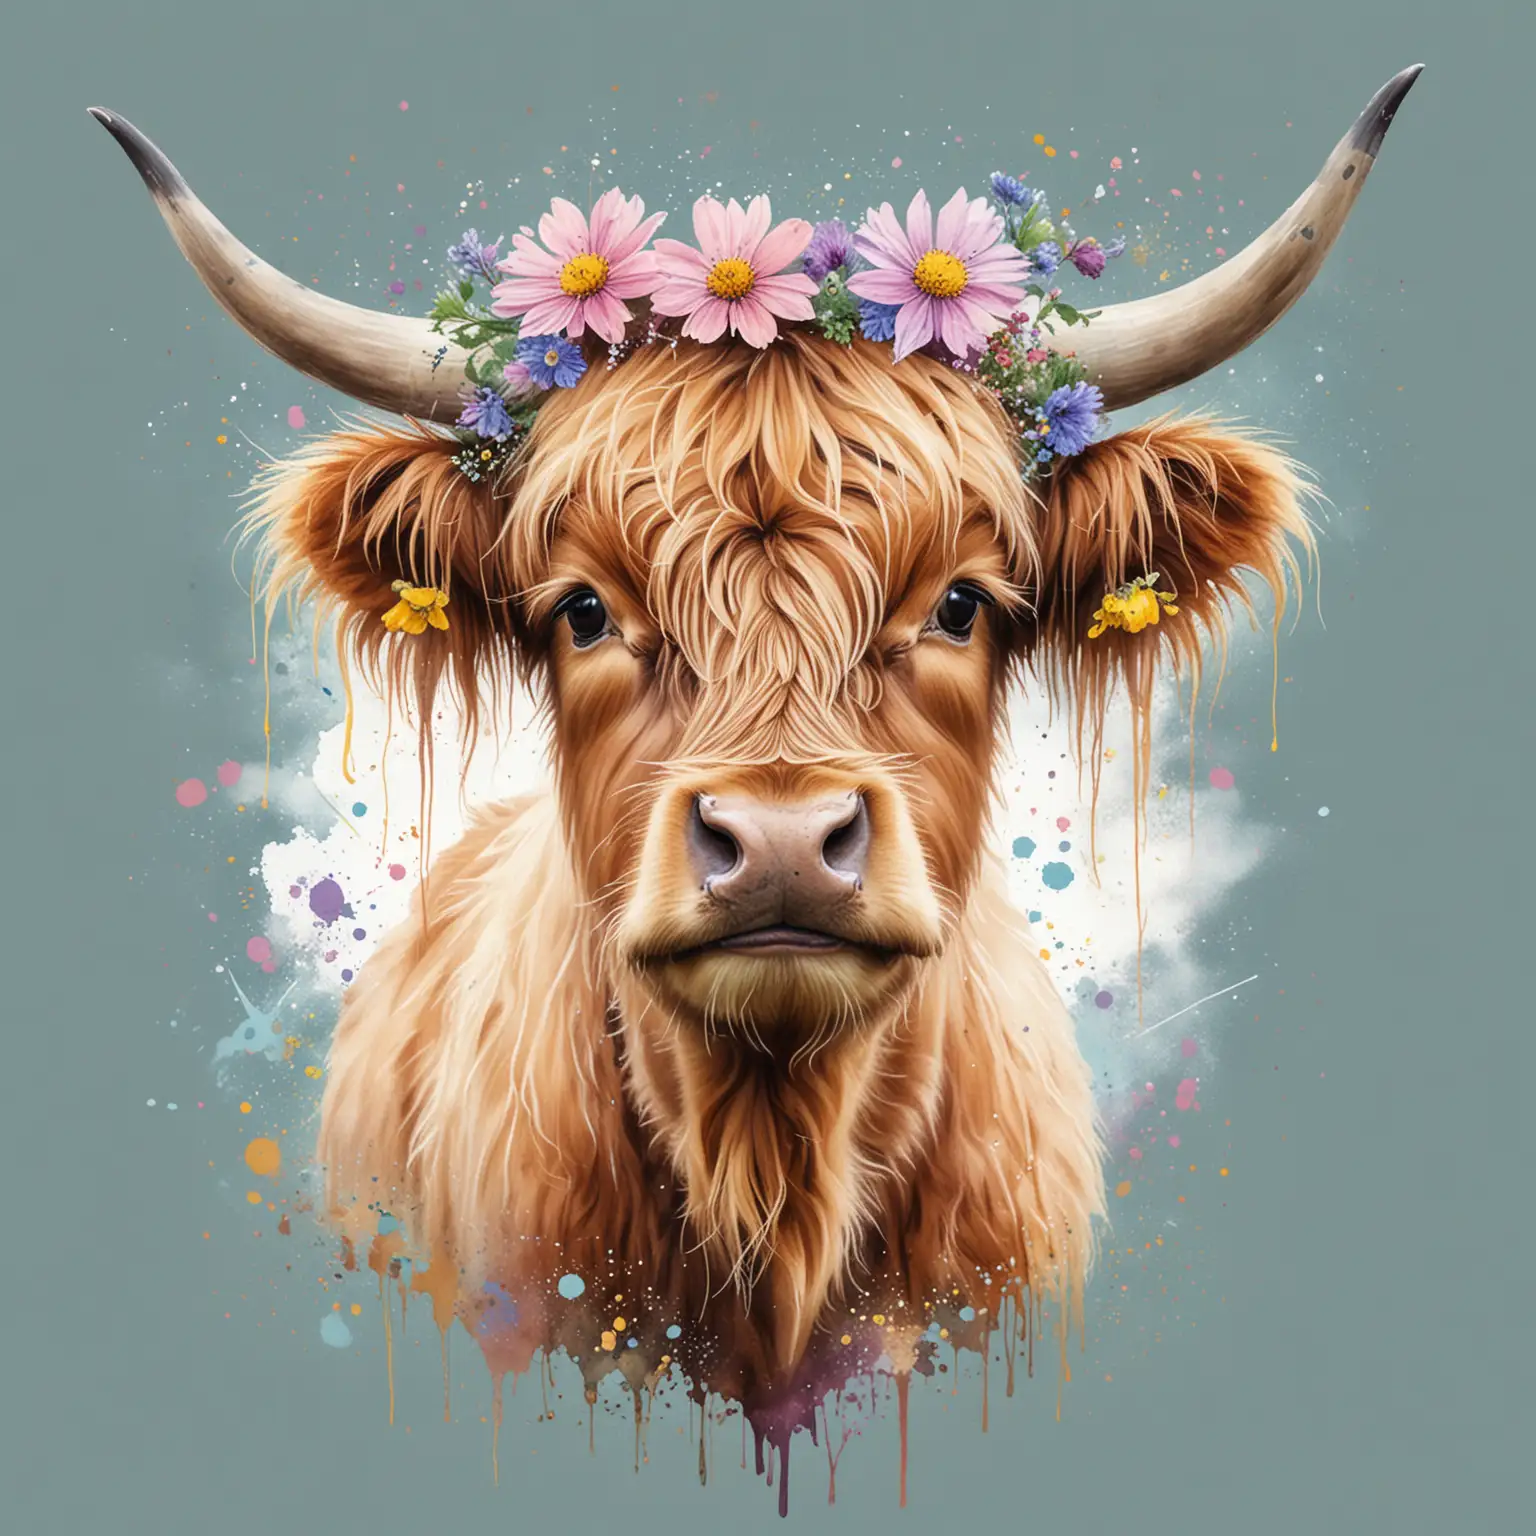 Watercolour effect, pastel splatter, highland calf with flowers in hair